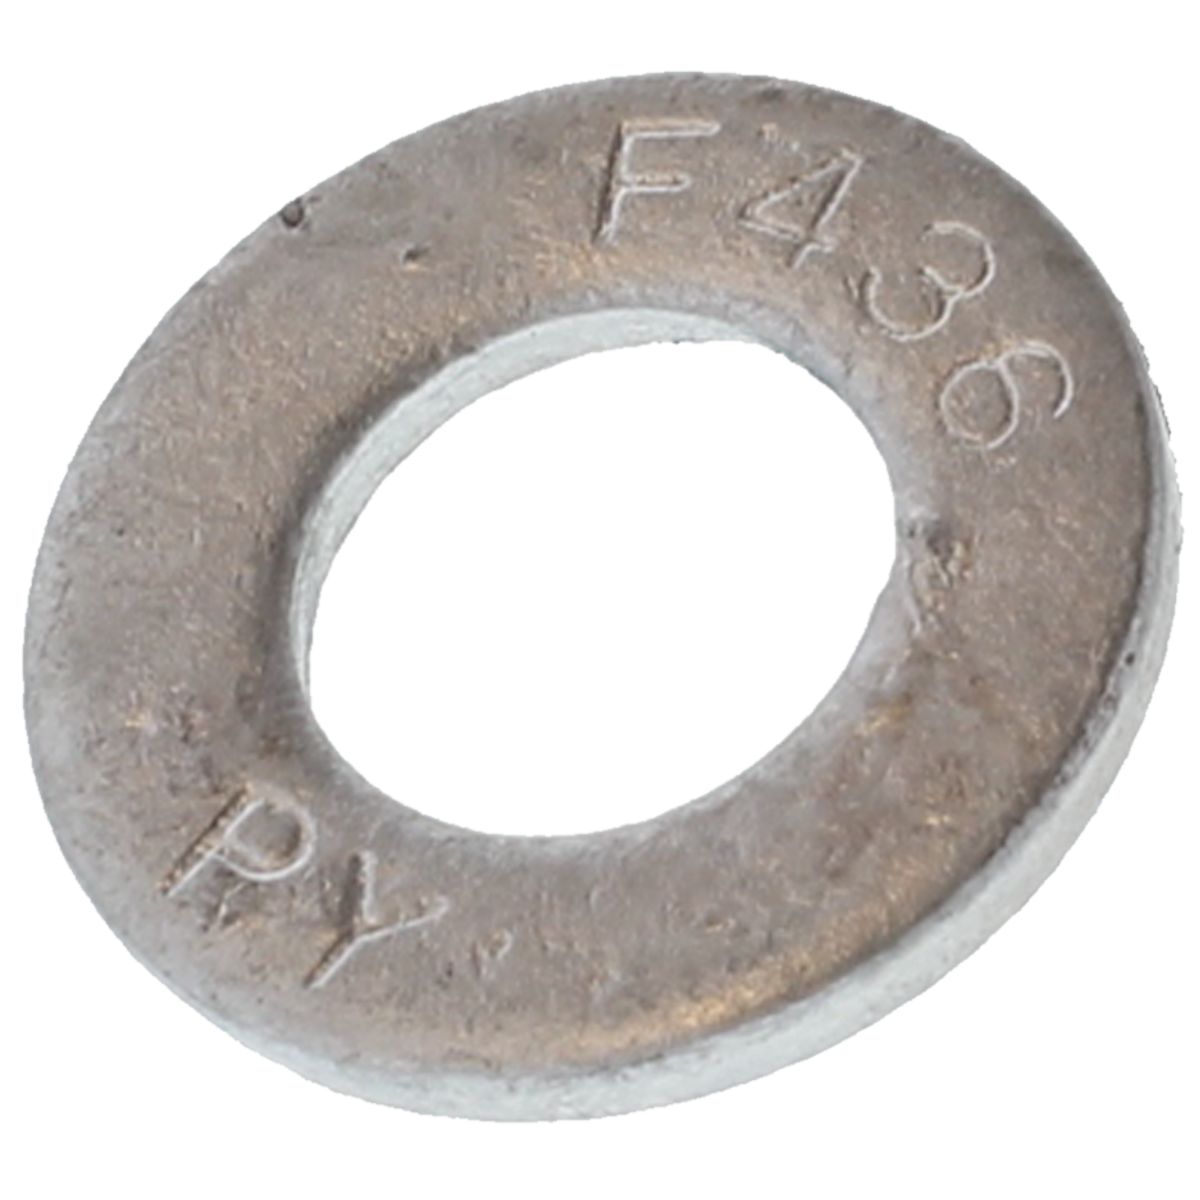 1-1/4" x 2-1/2" x .136/.177 Structural Washers — ASTM F436 Hardened Steel Galvanized 1/PKG